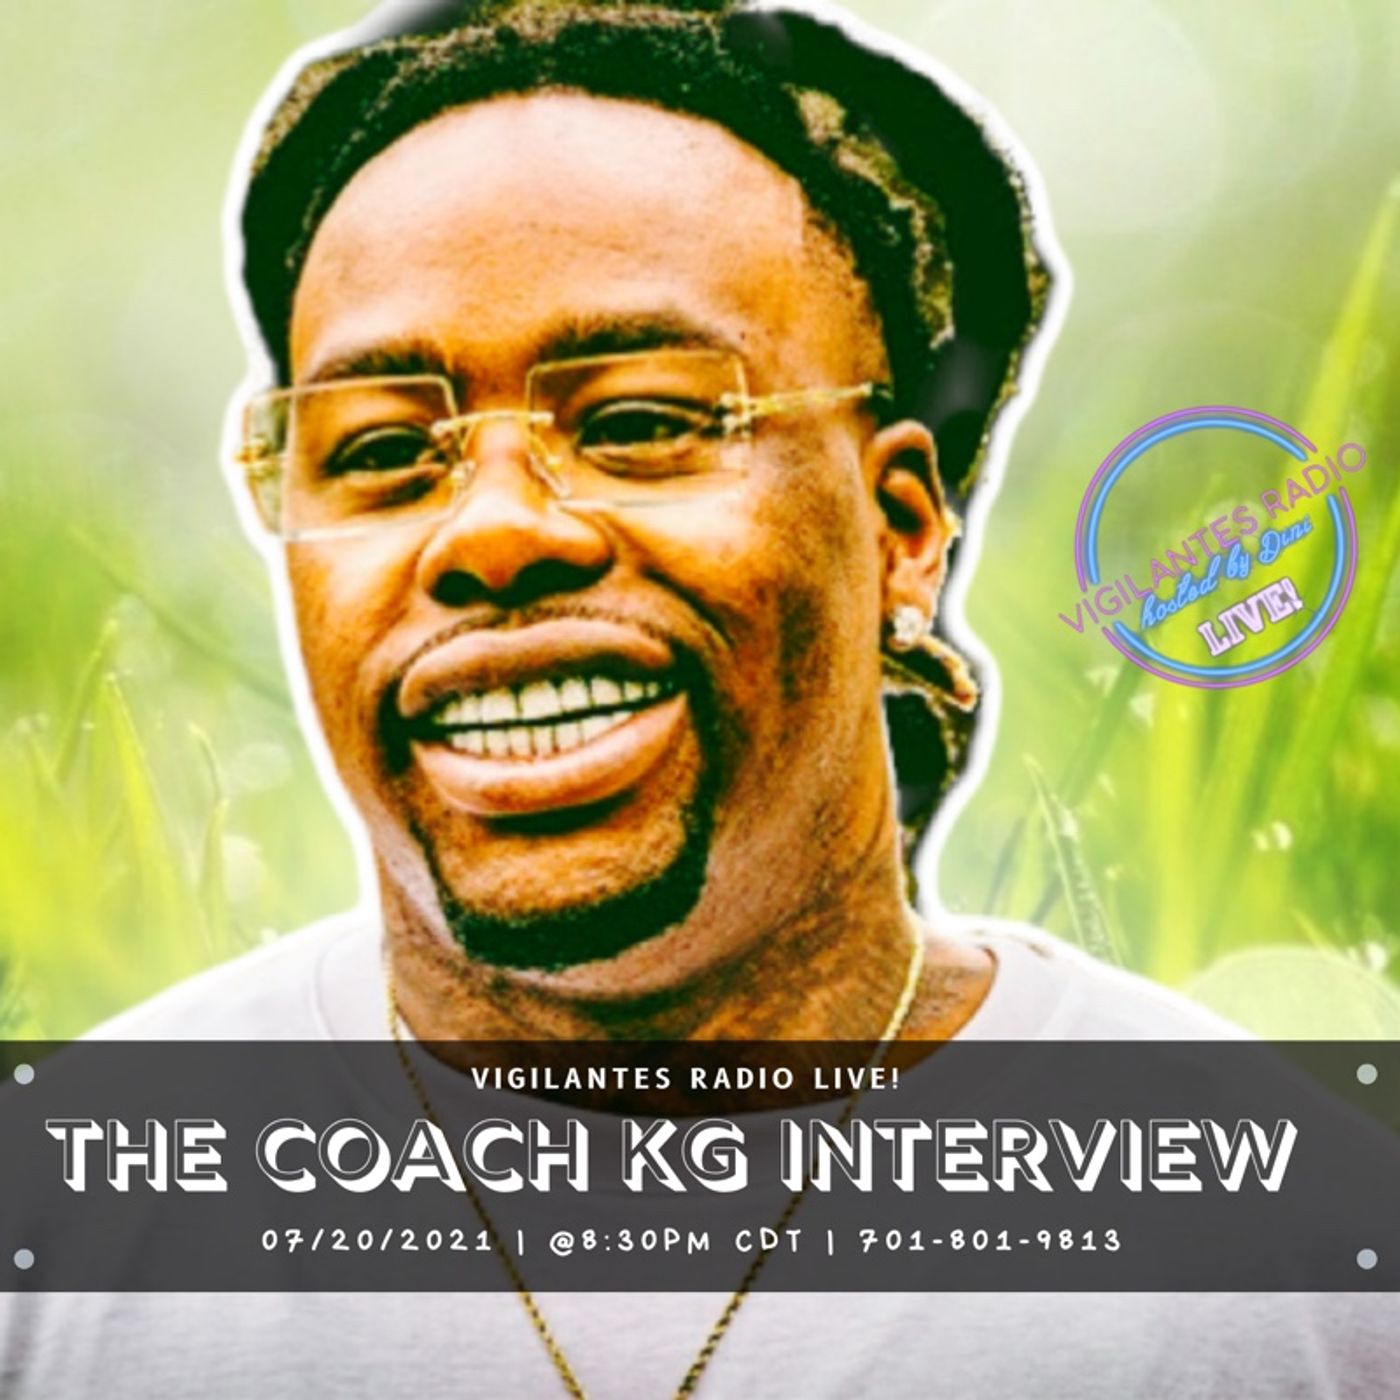 The Coach KG Interview. Image